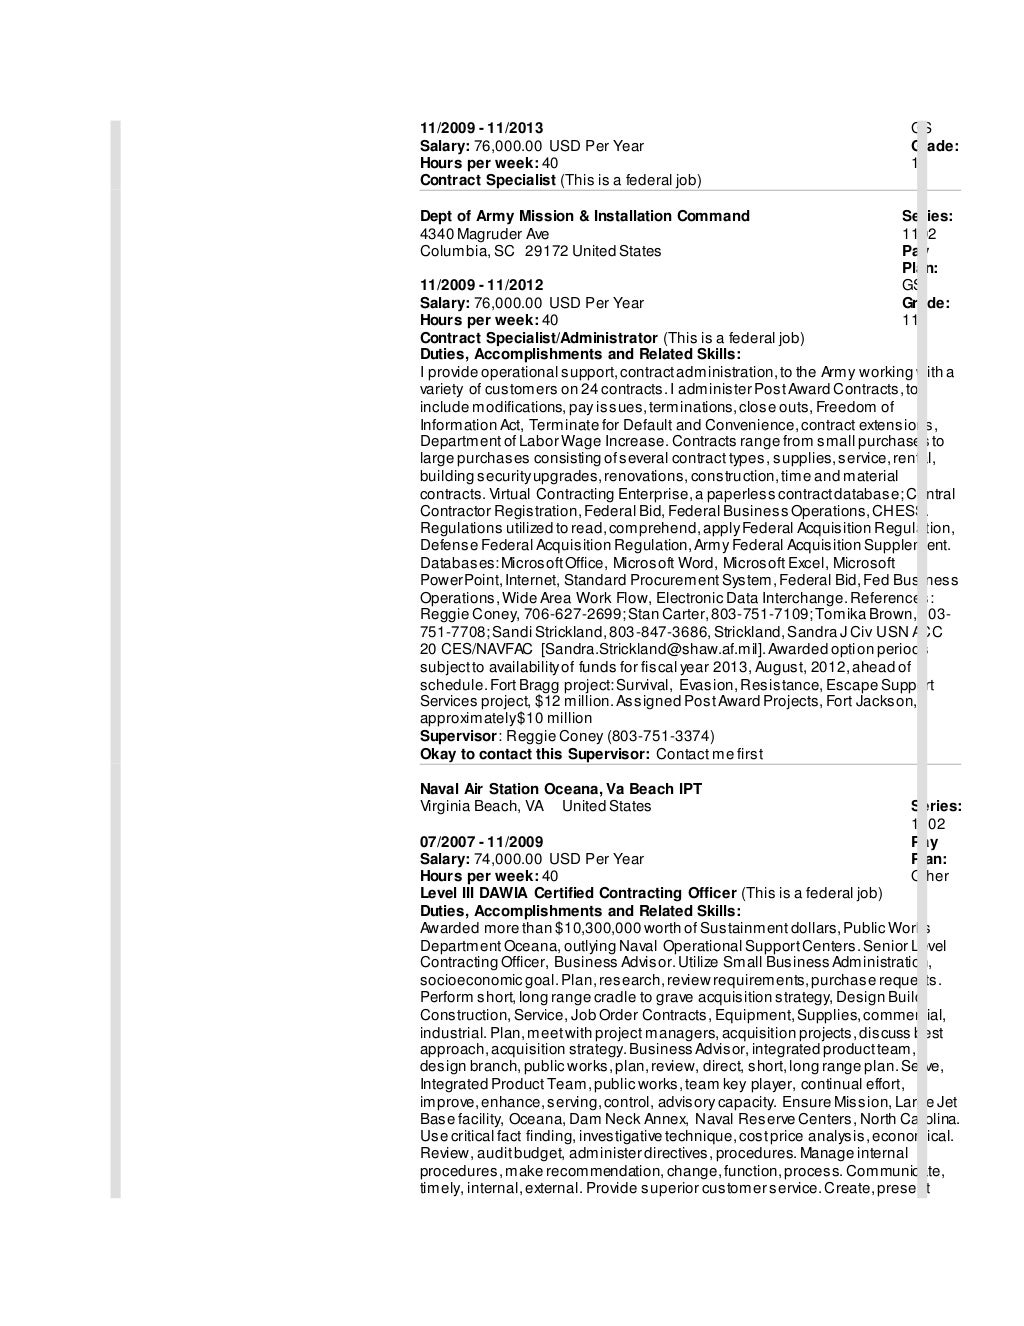 usajobs resume builder not working